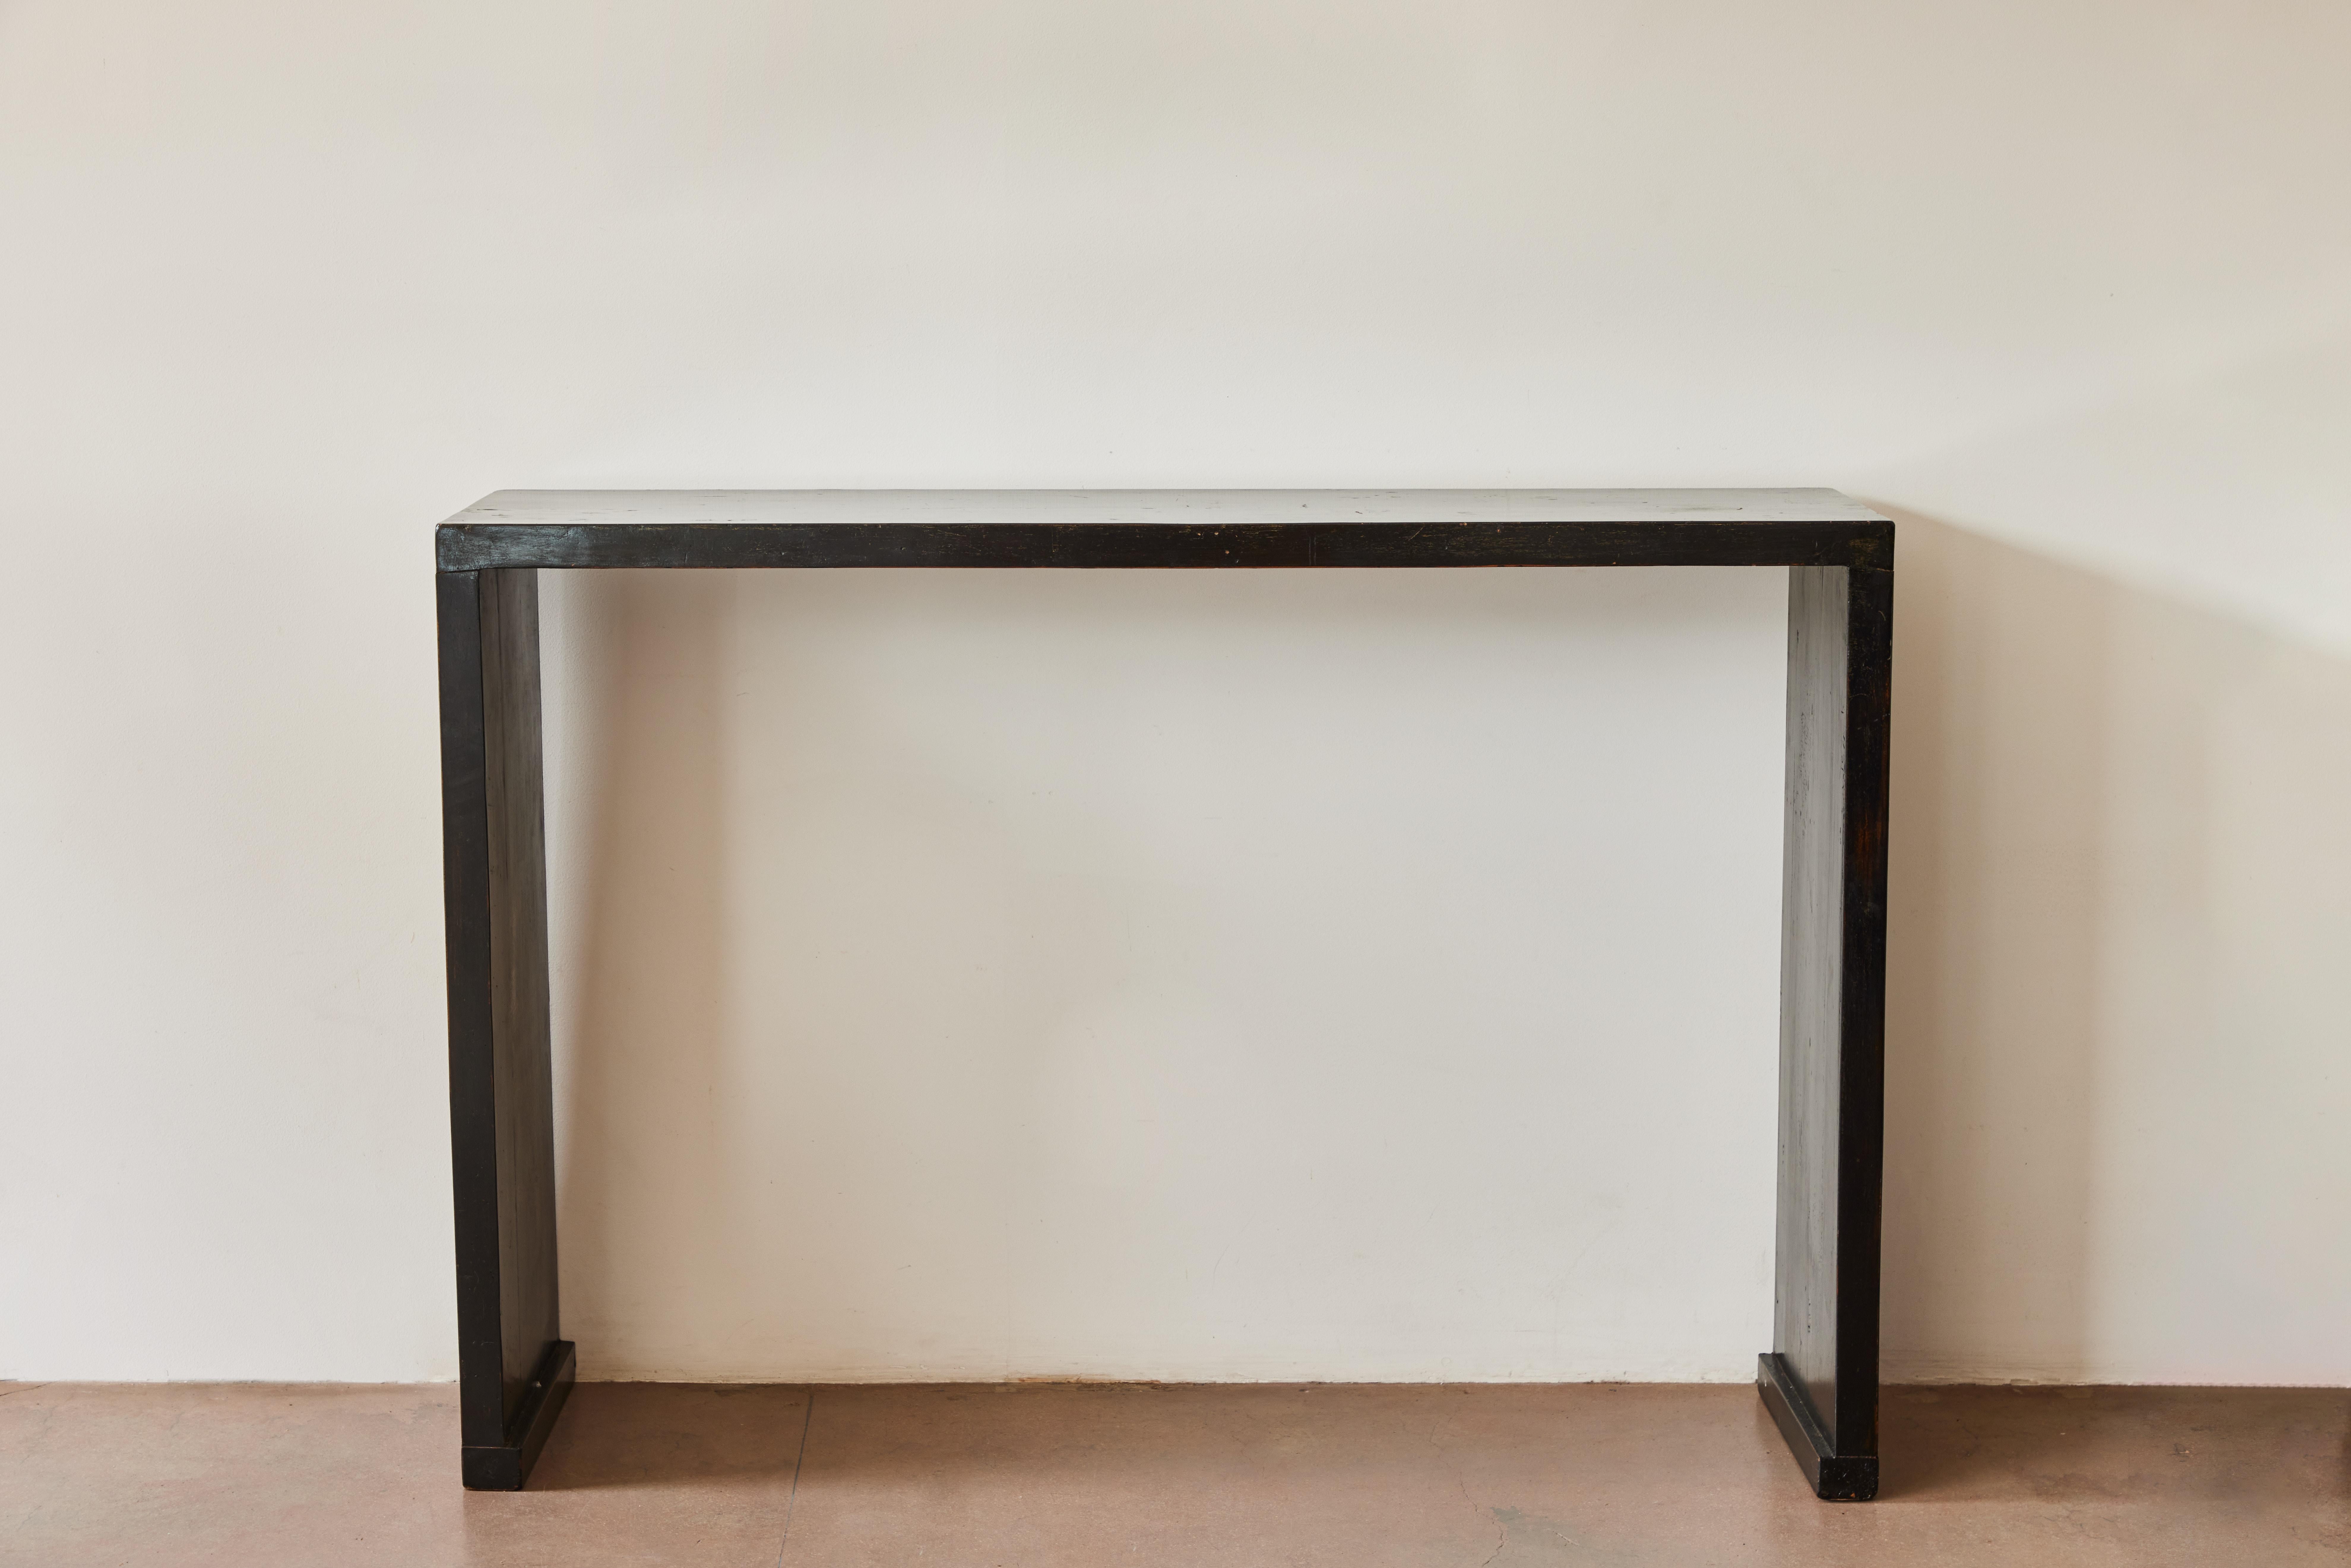 Console table in black lacquered wood. Made in China circa early 20th century. Two available.